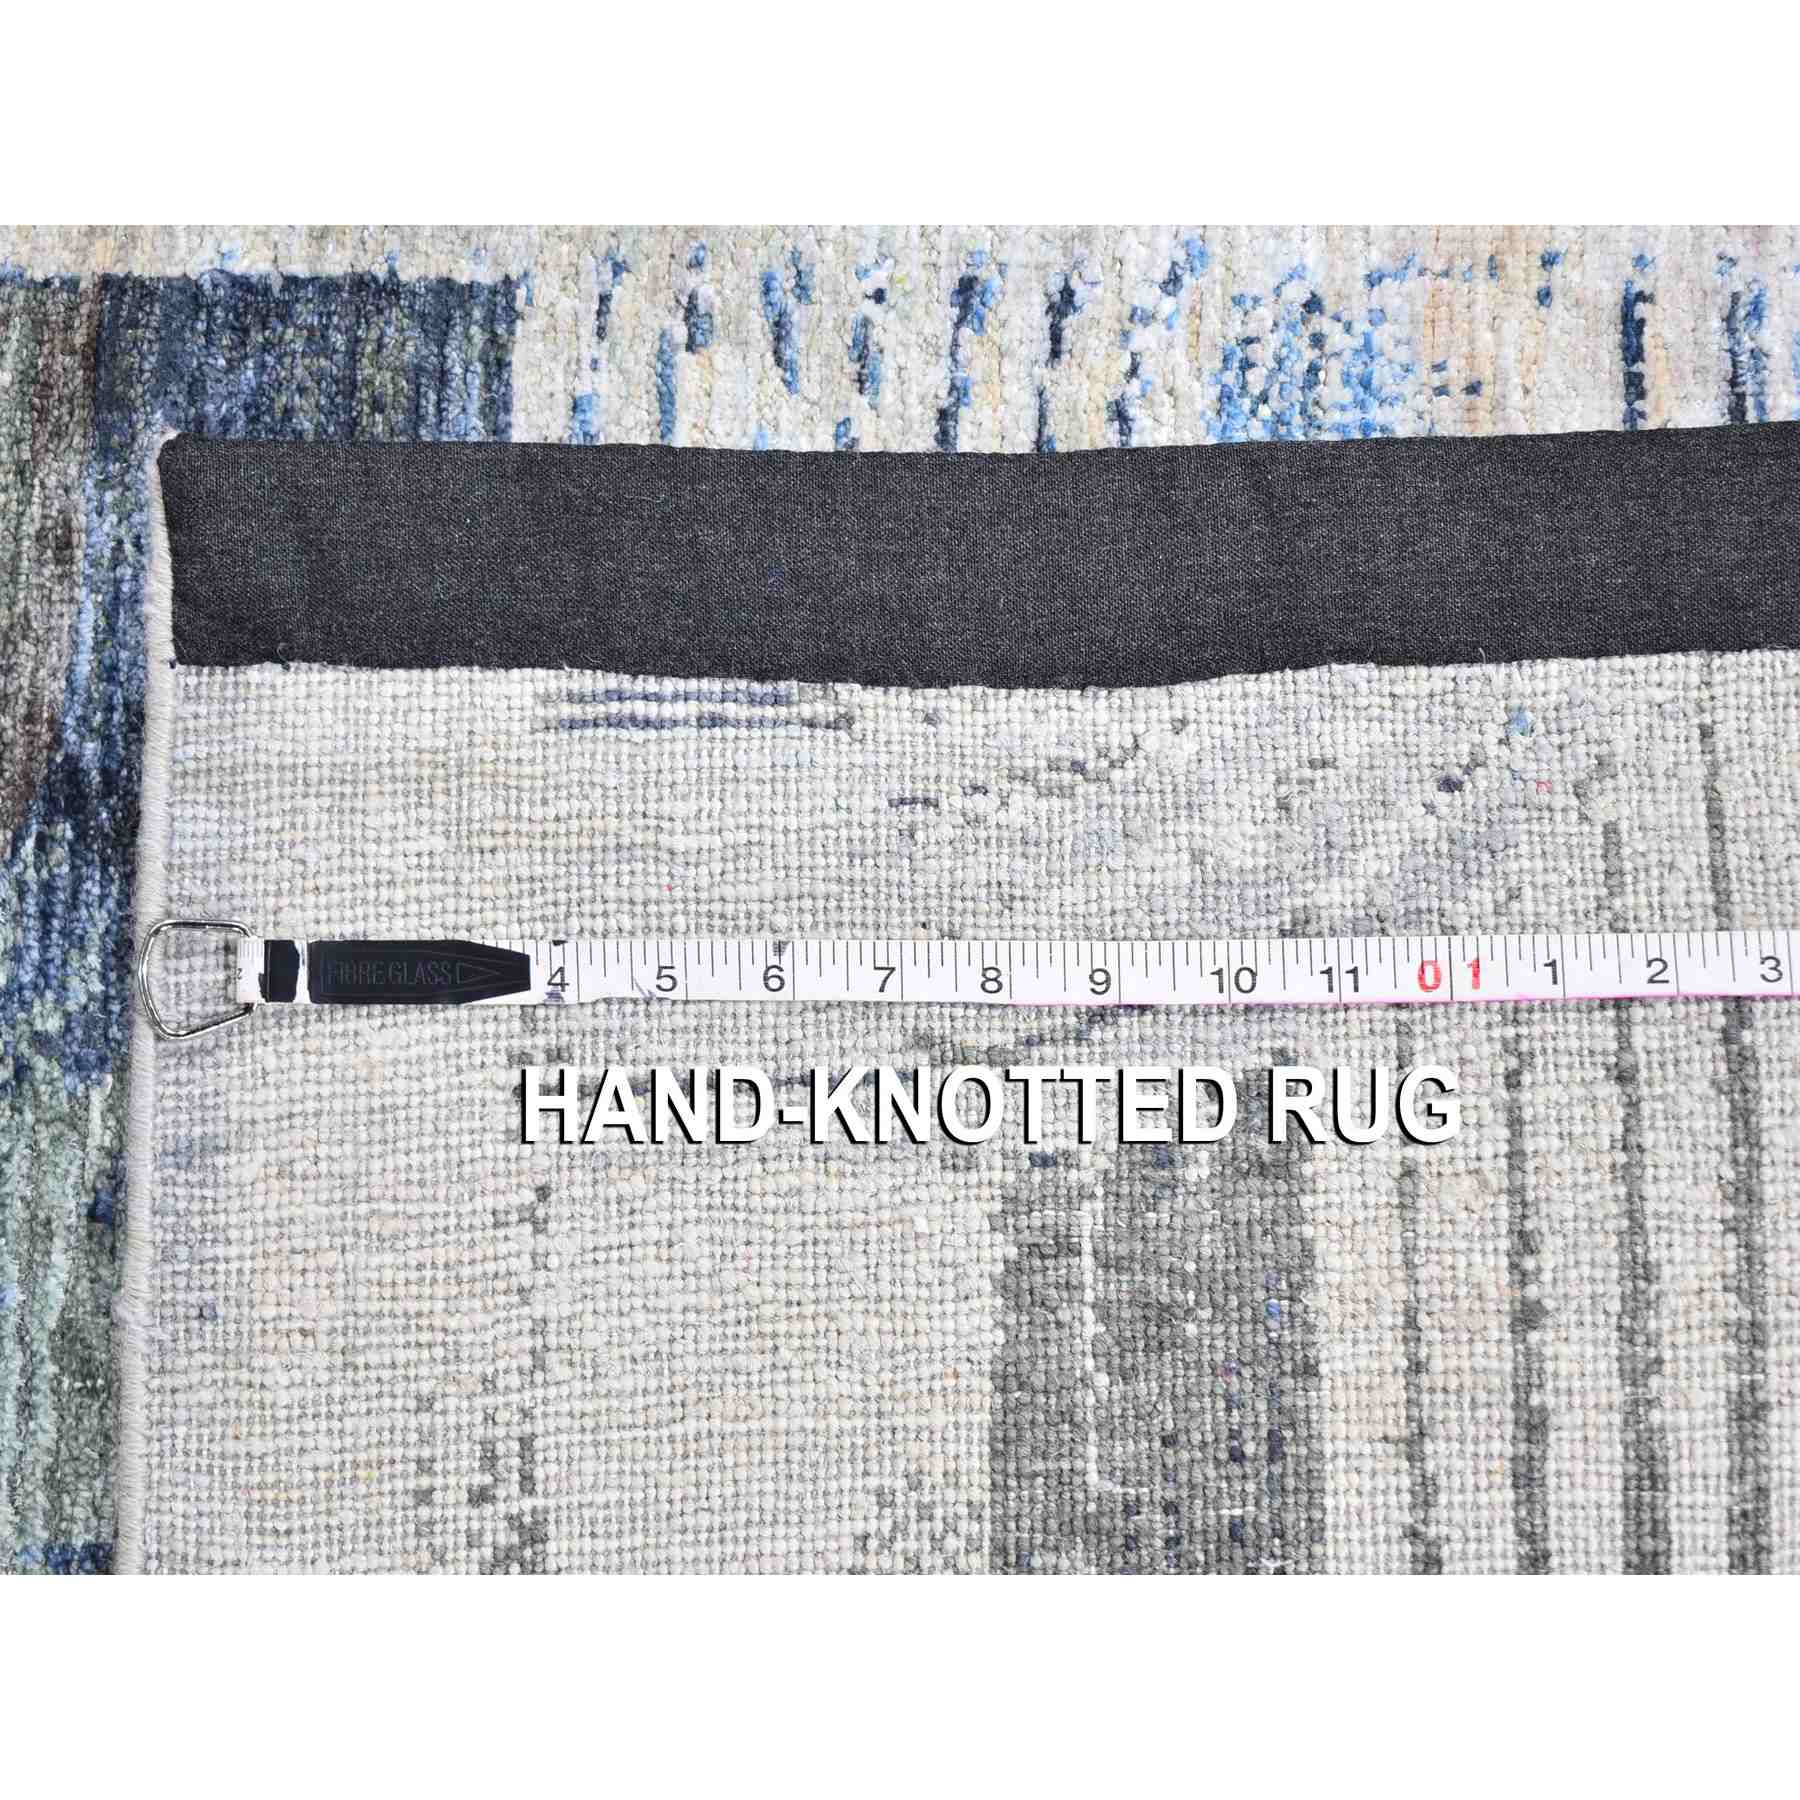 Modern-and-Contemporary-Hand-Knotted-Rug-297520